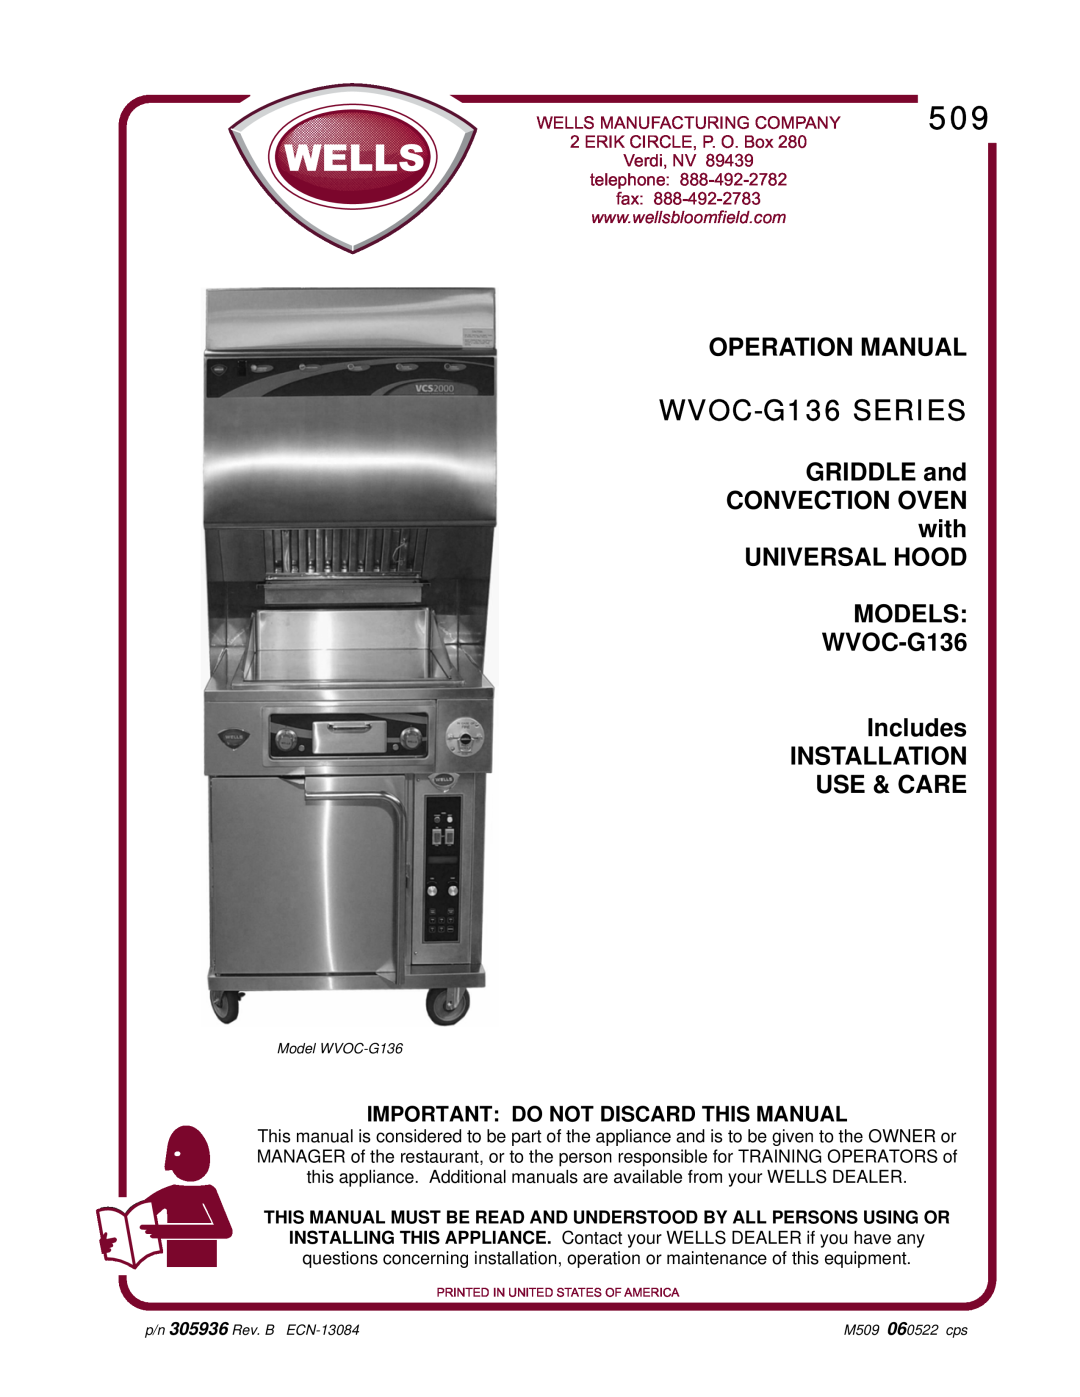 Wells operation manual GRIDDLE and, UNIVERSAL HOOD MODELS WVOC-G136 Includes INSTALLATION USE & CARE, WVOC-G136 SERIES 